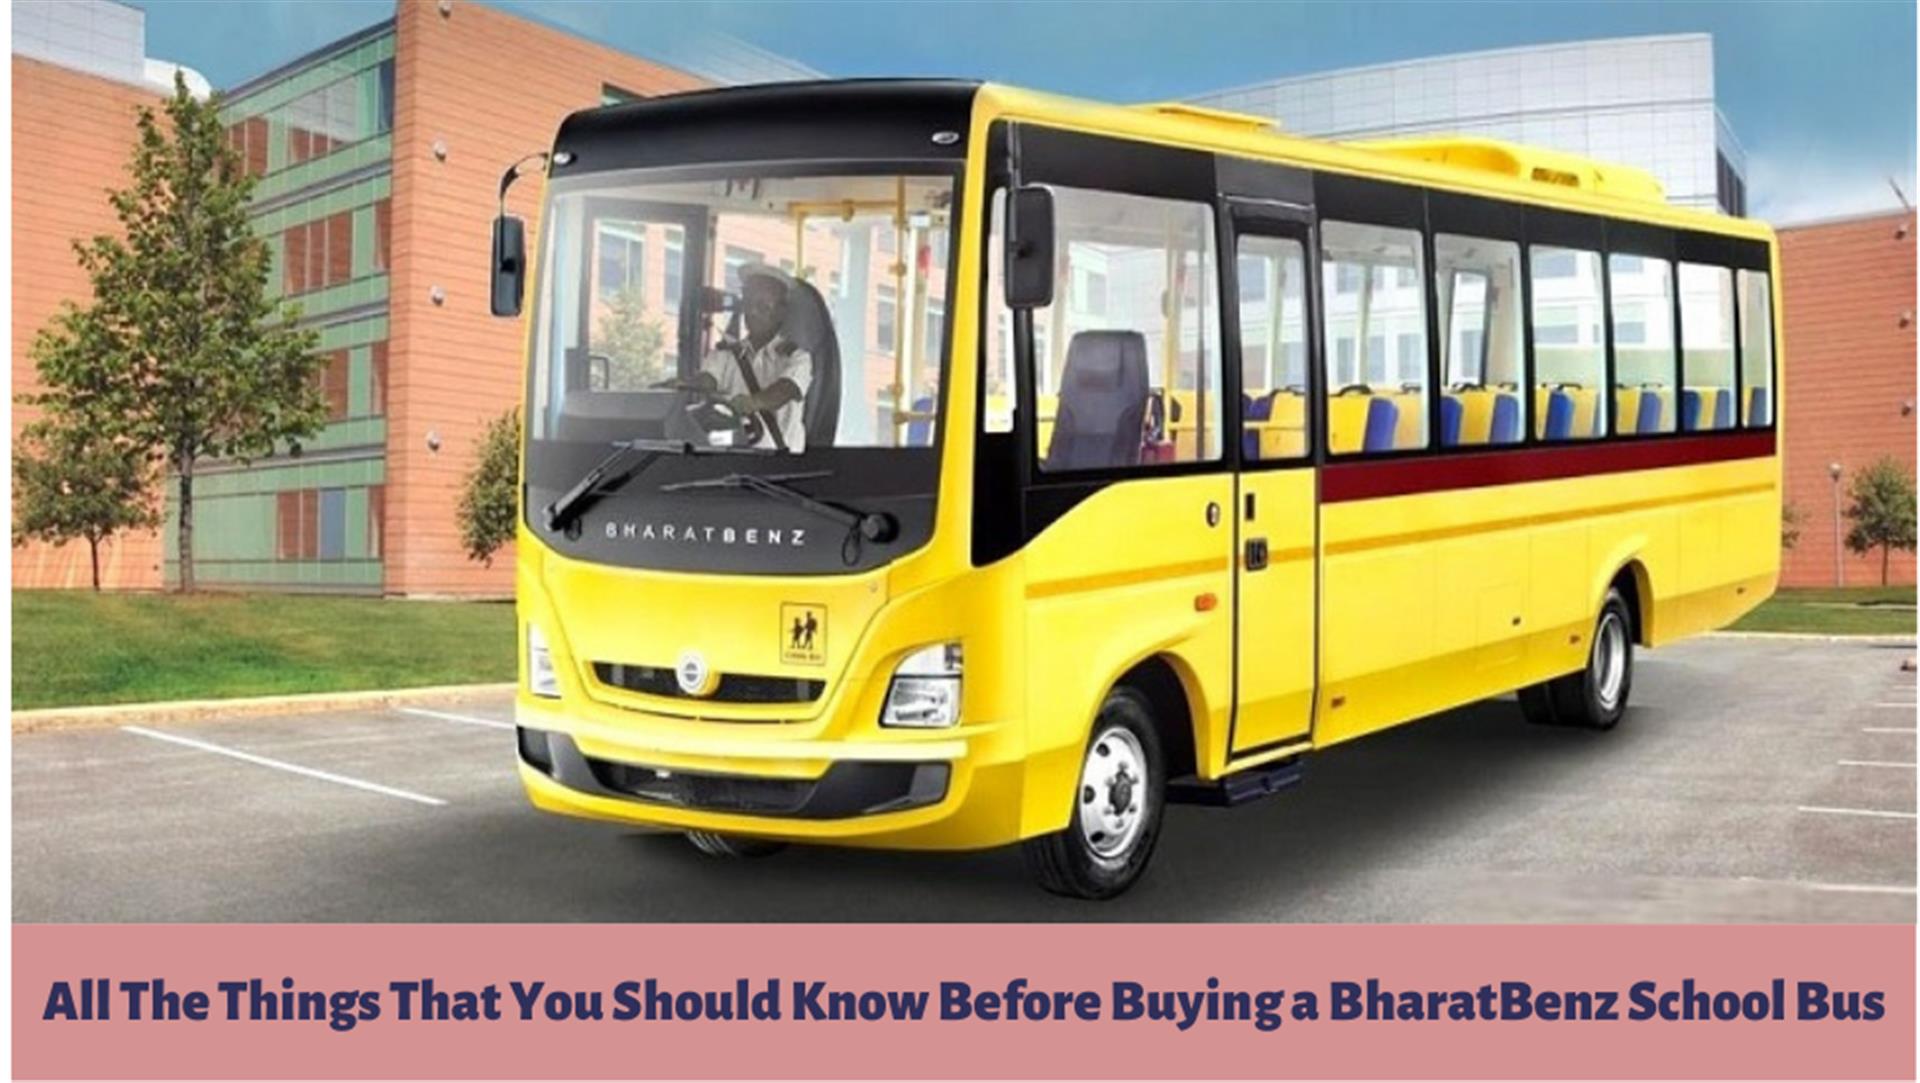 All The Things That You Should Know Before Buying a BharatBenz School Bus